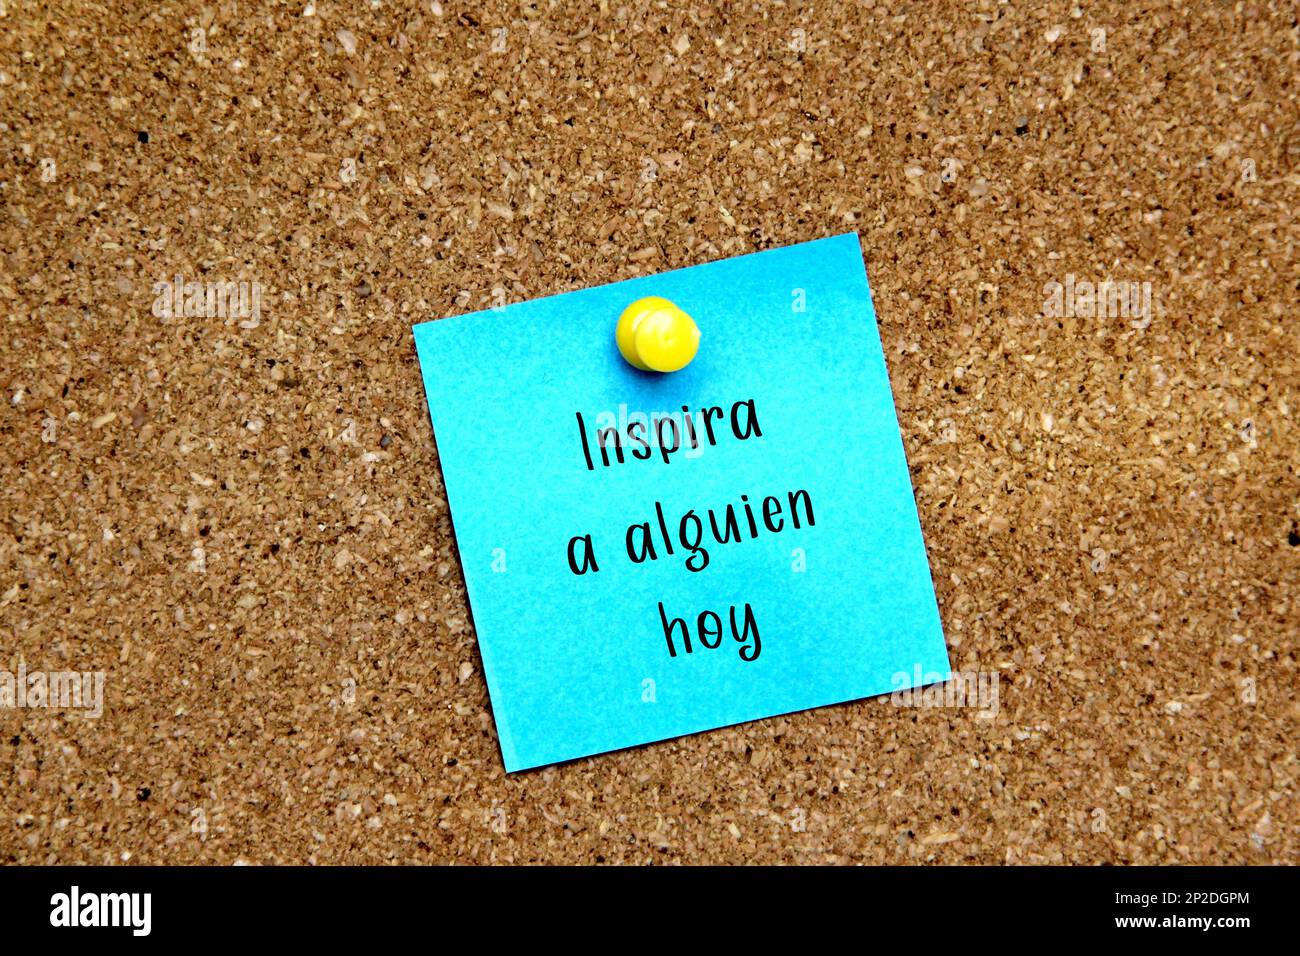 Multicolored notes on cork board with message in Spanish language 'Inspire someone today' Stock Photo